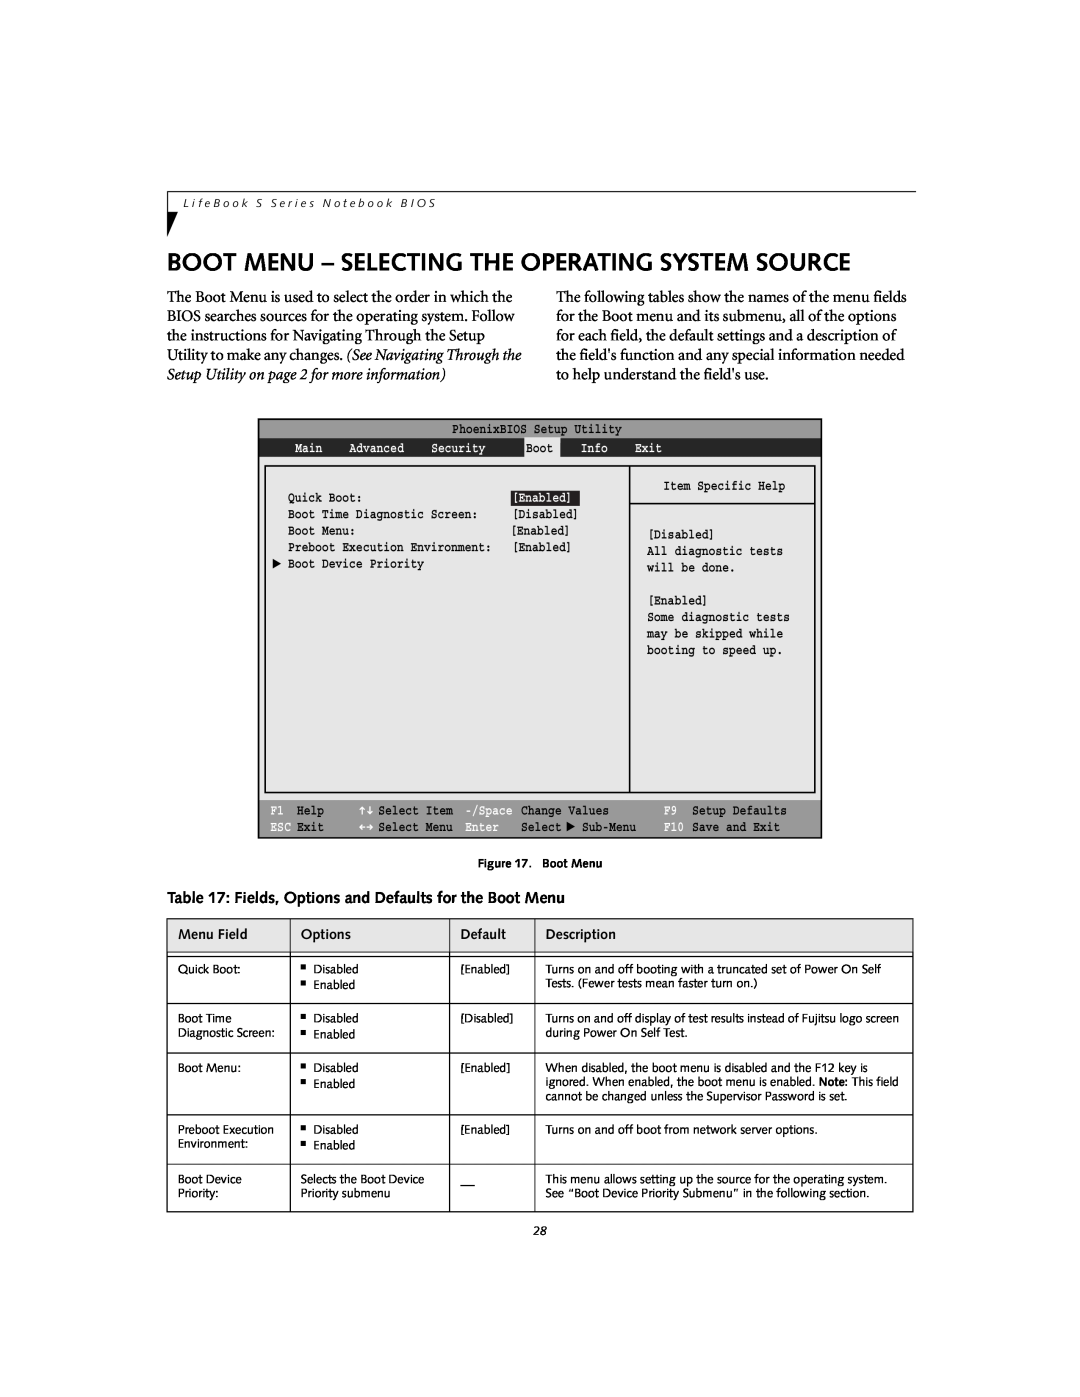 Fujitsu S7110 manual Boot Menu - Selecting The Operating System Source, Fields, Options and Defaults for the Boot Menu 